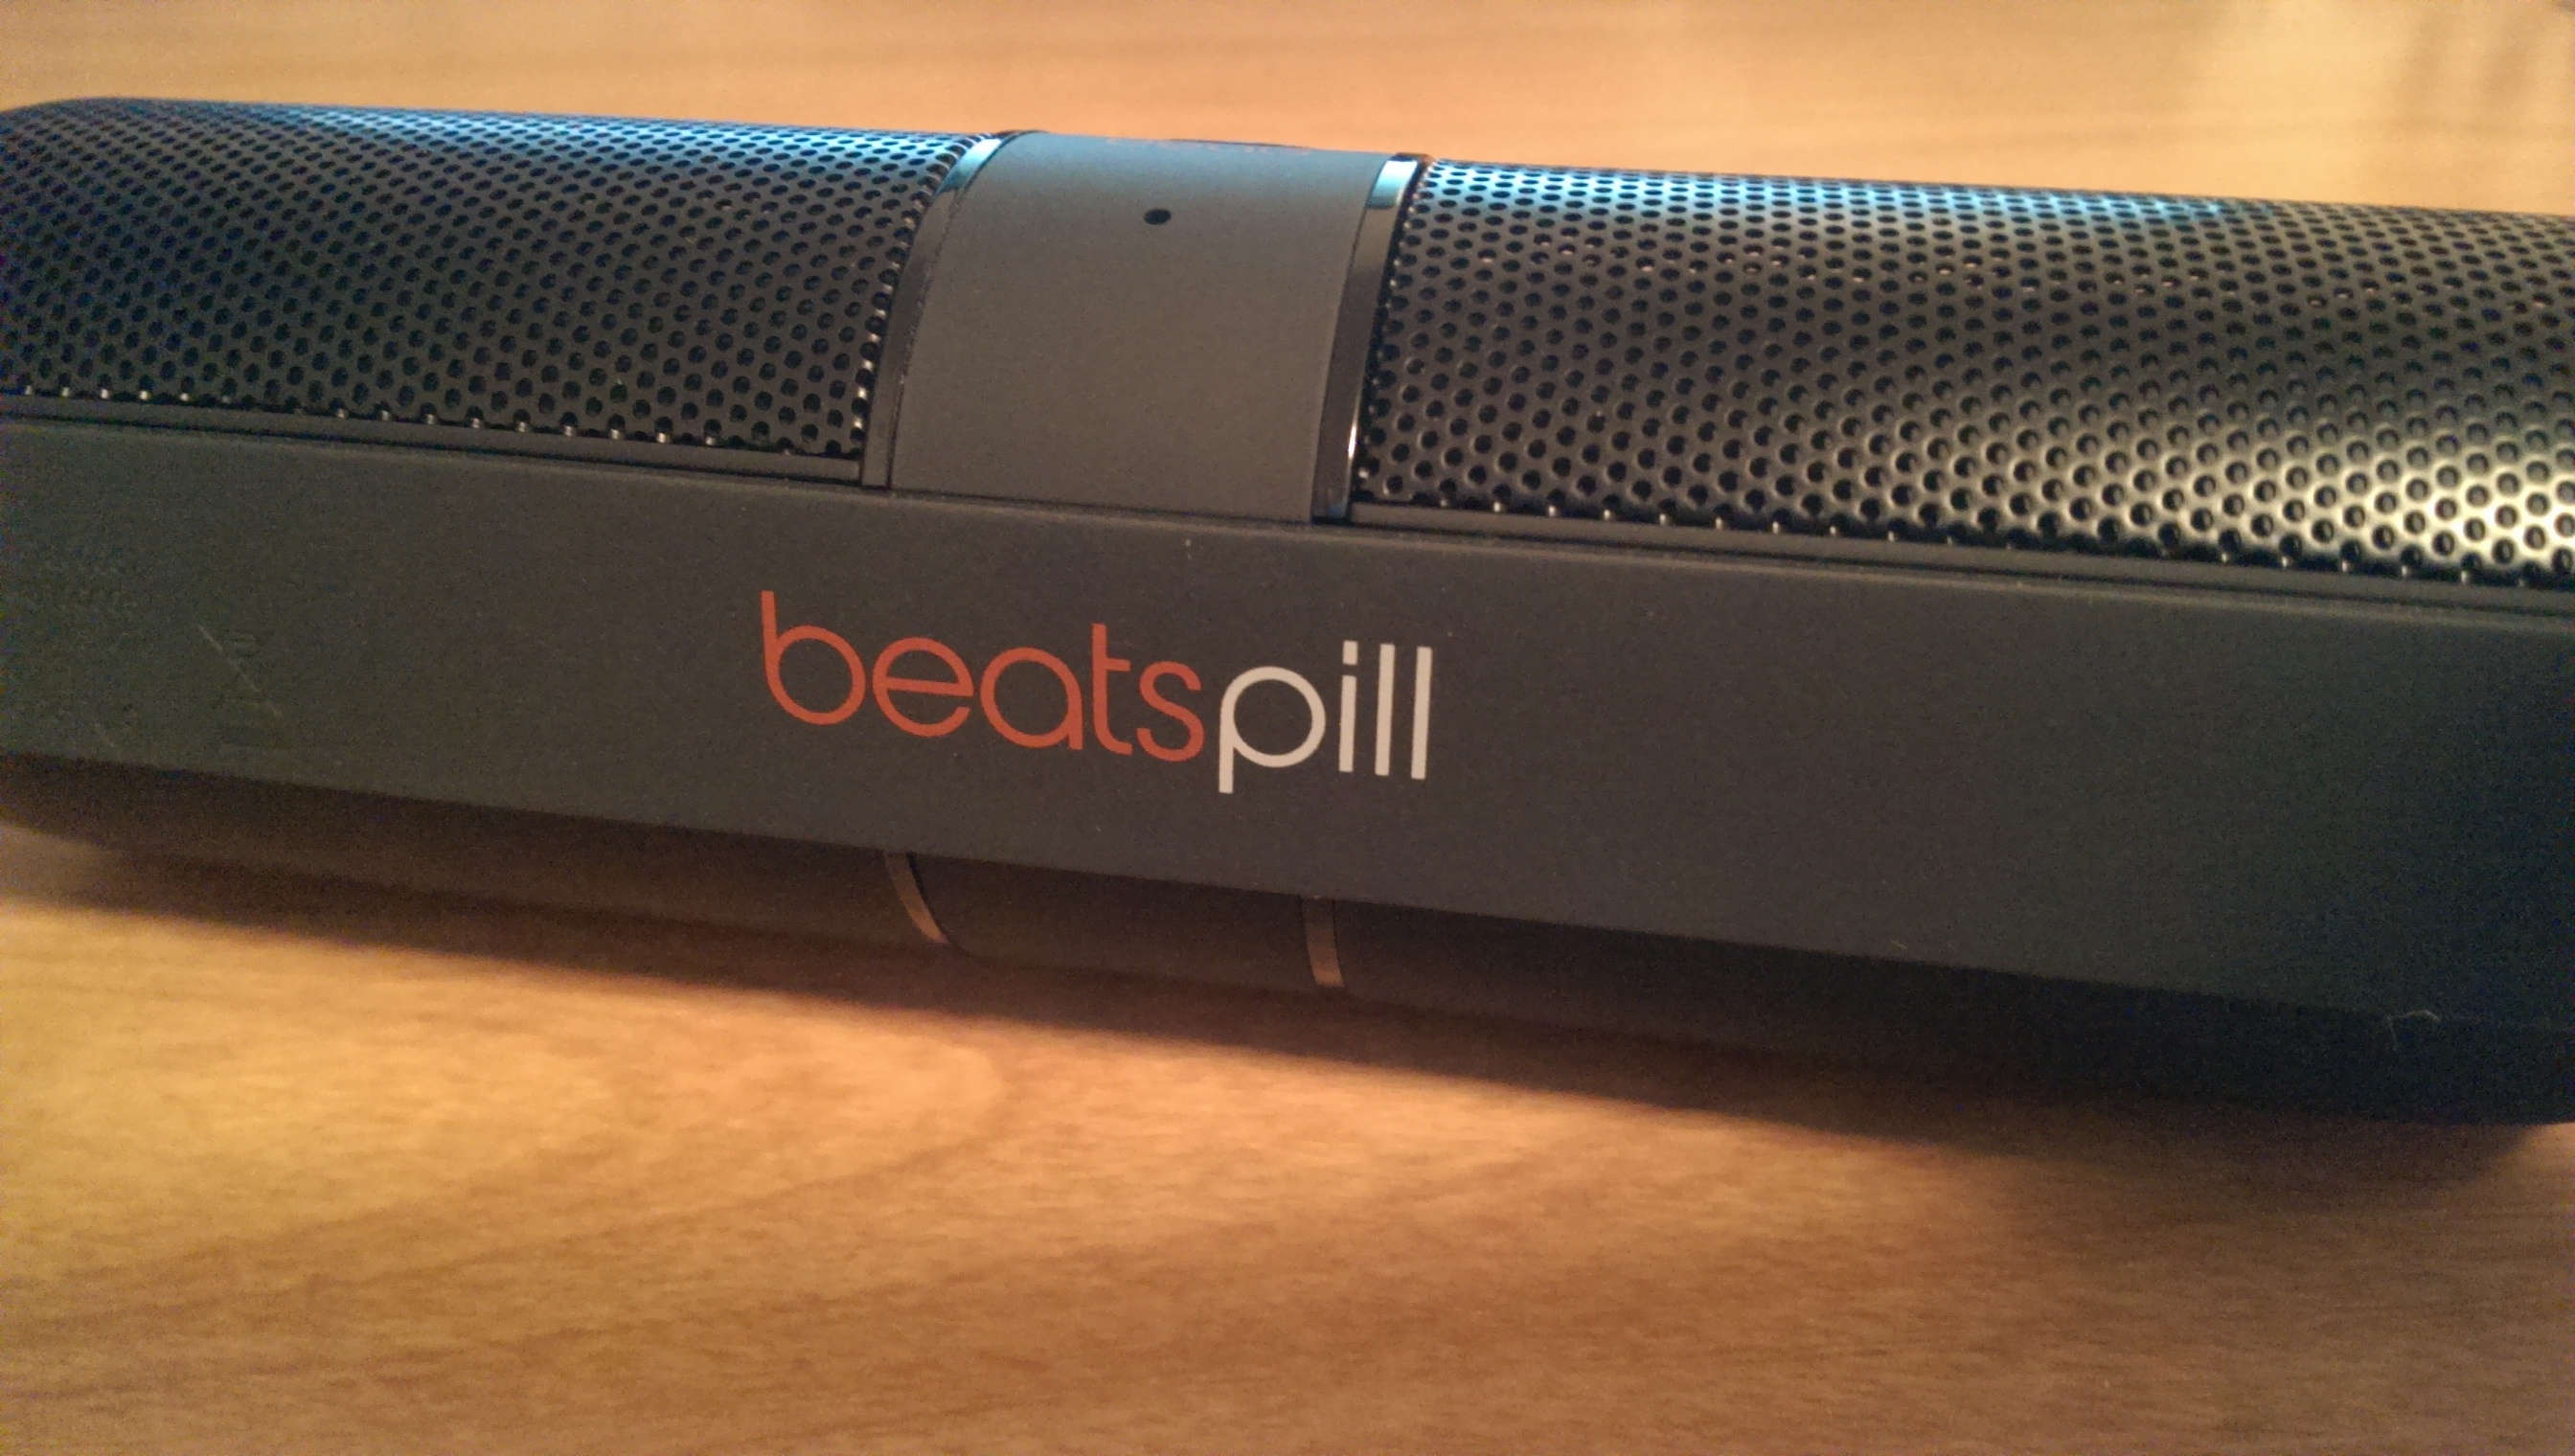 difference between beats pill 1.0 and 2.0